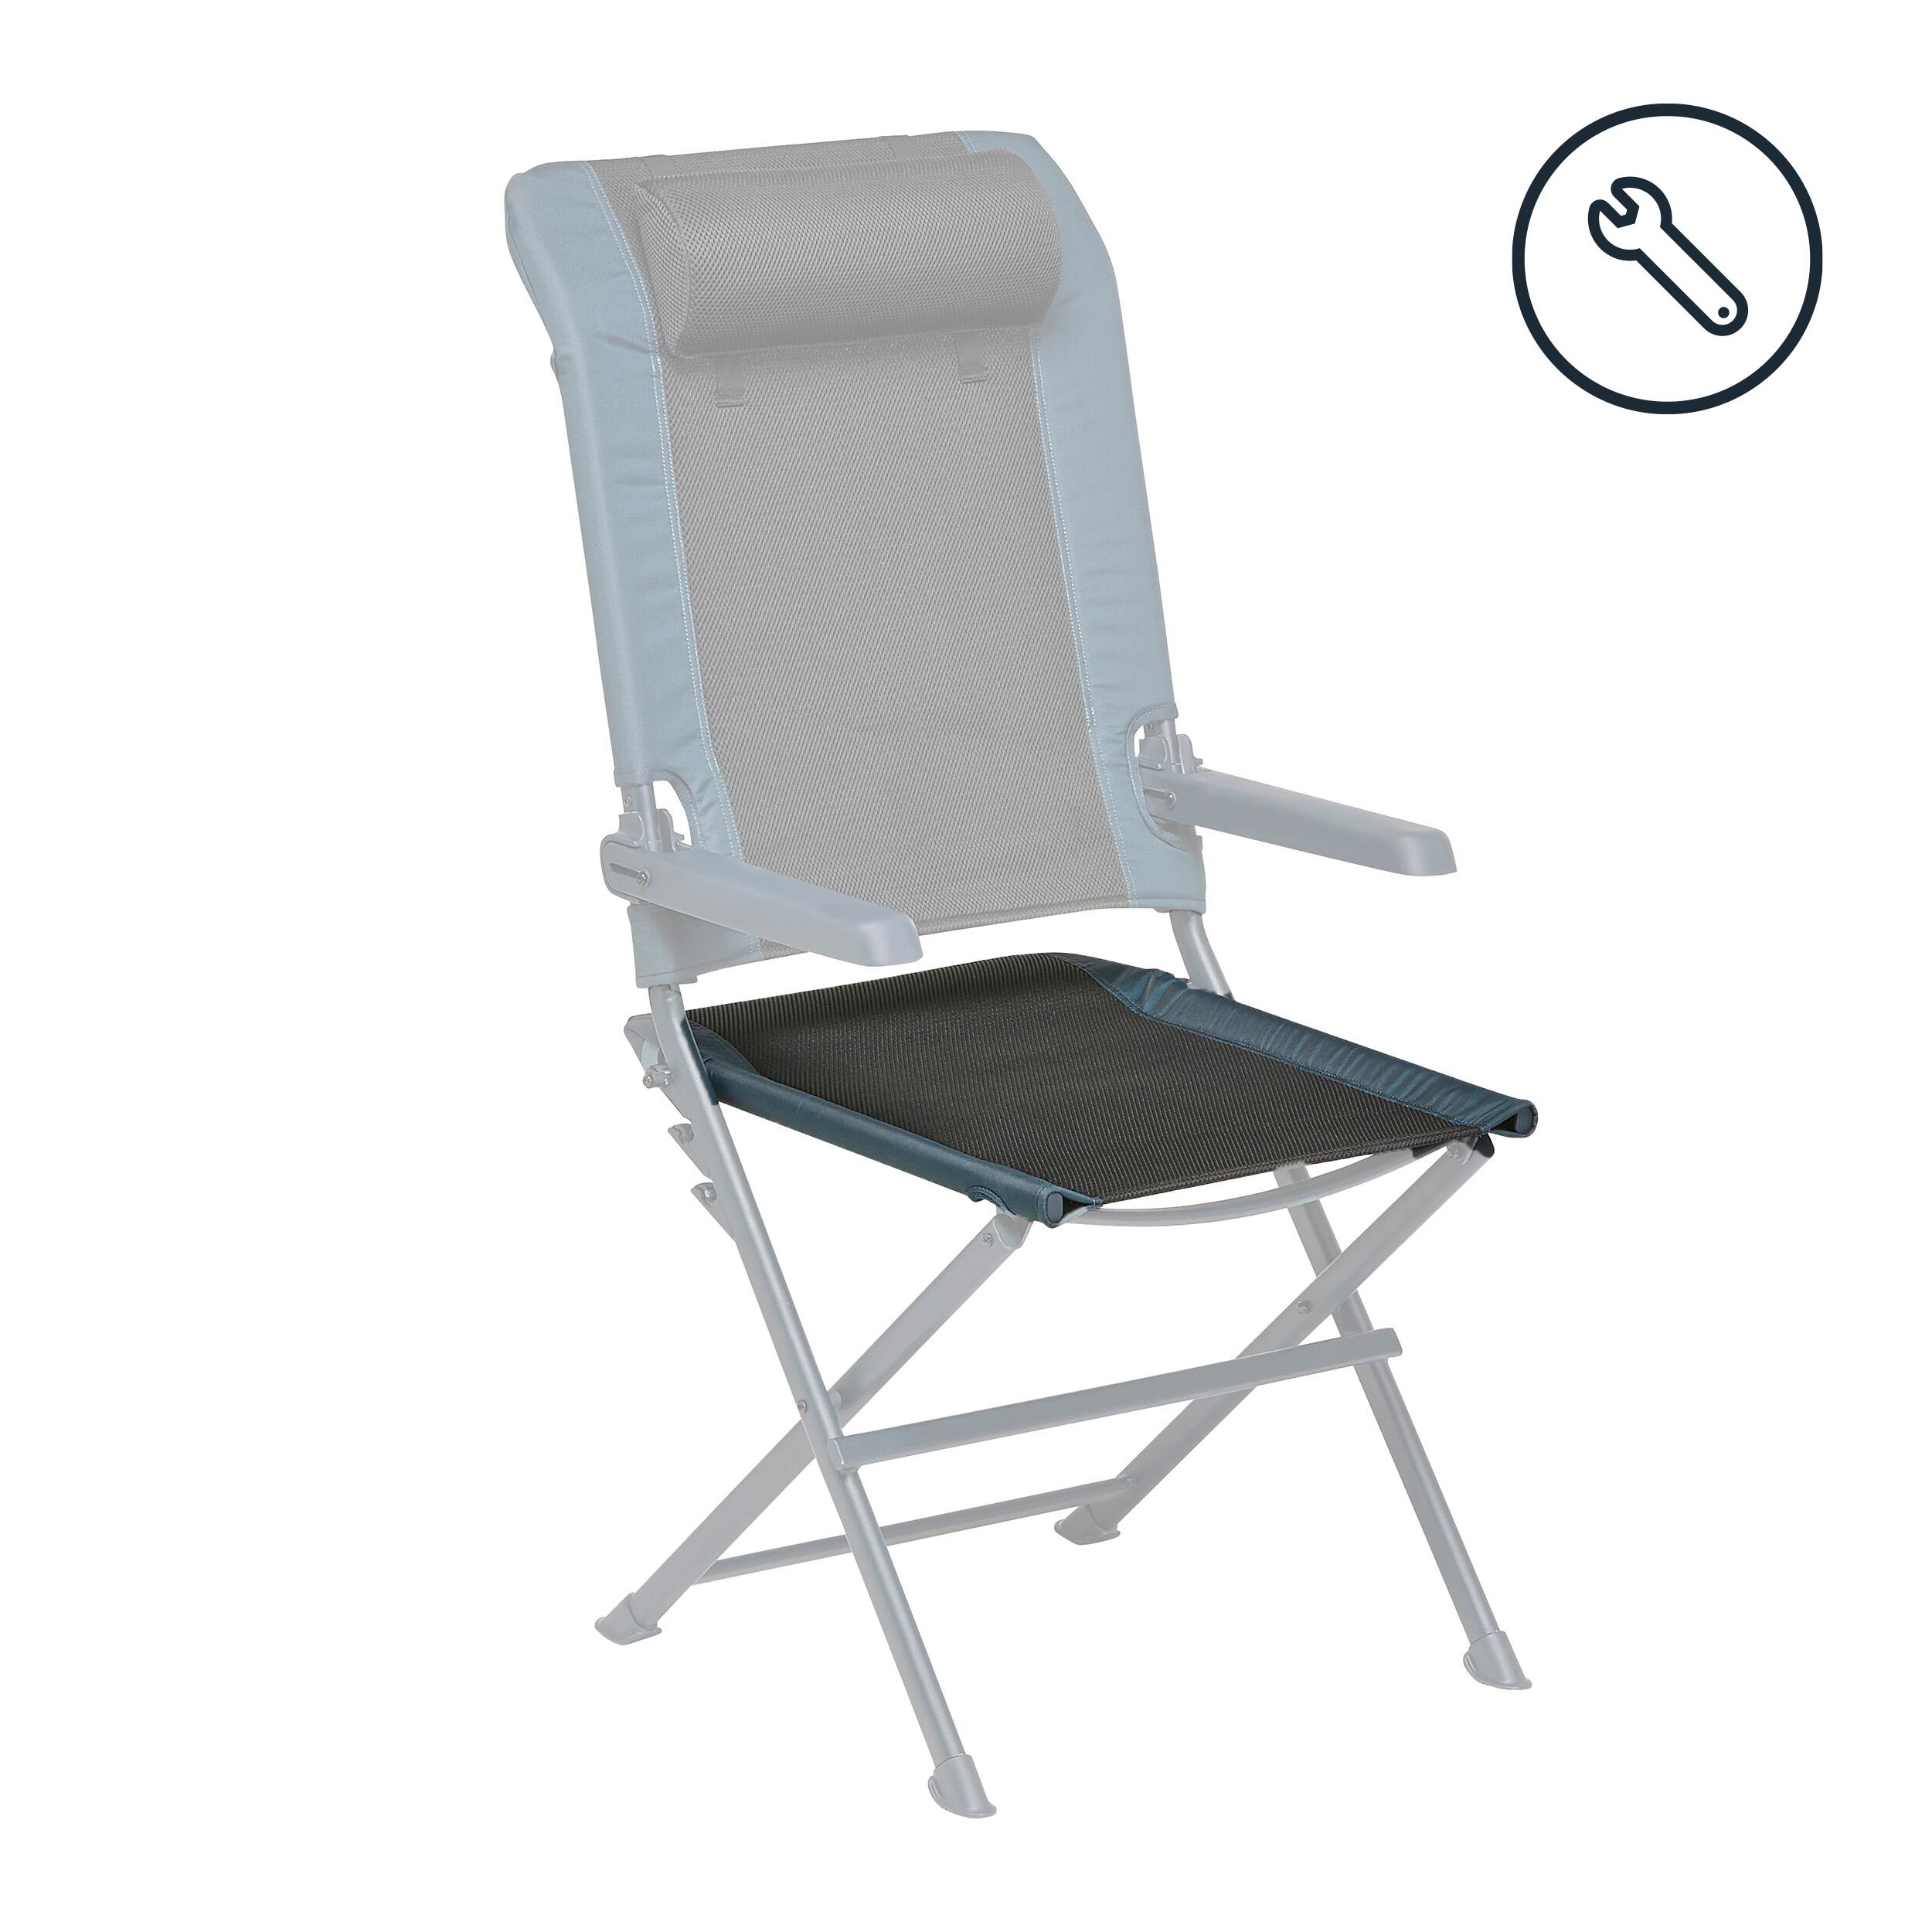 QUECHUA REPLACEMENT SEAT - SPARE PART FOR CHILL MEAL MULTIPOSITION CHAIR